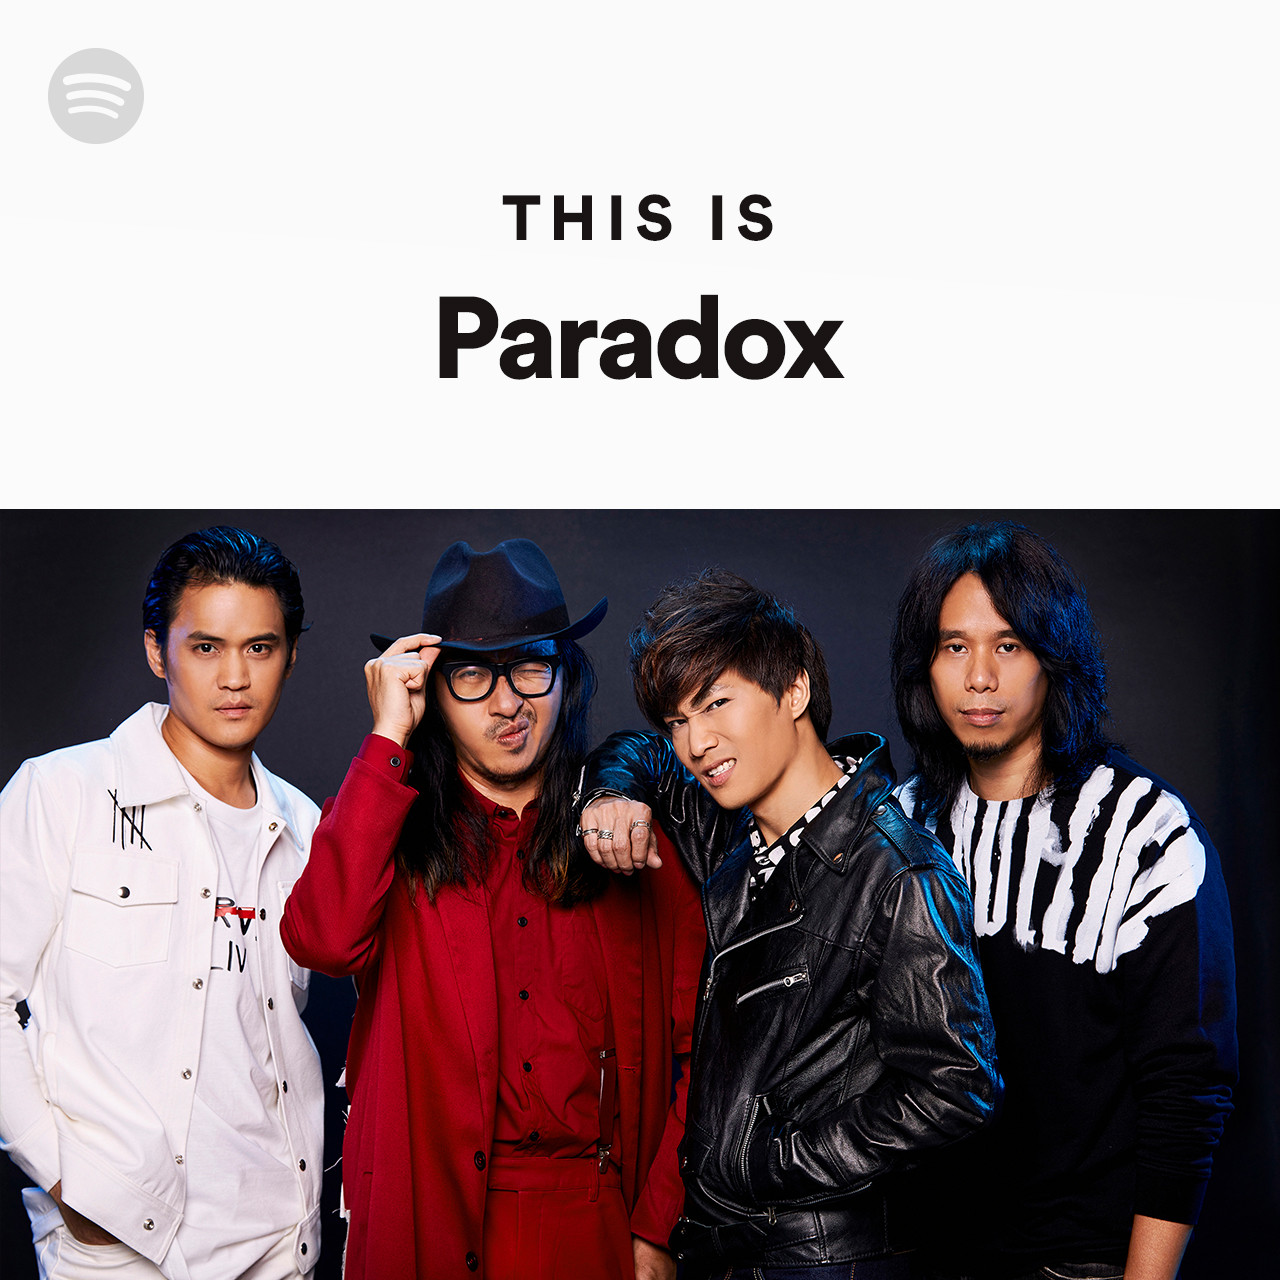 This Is Paradox